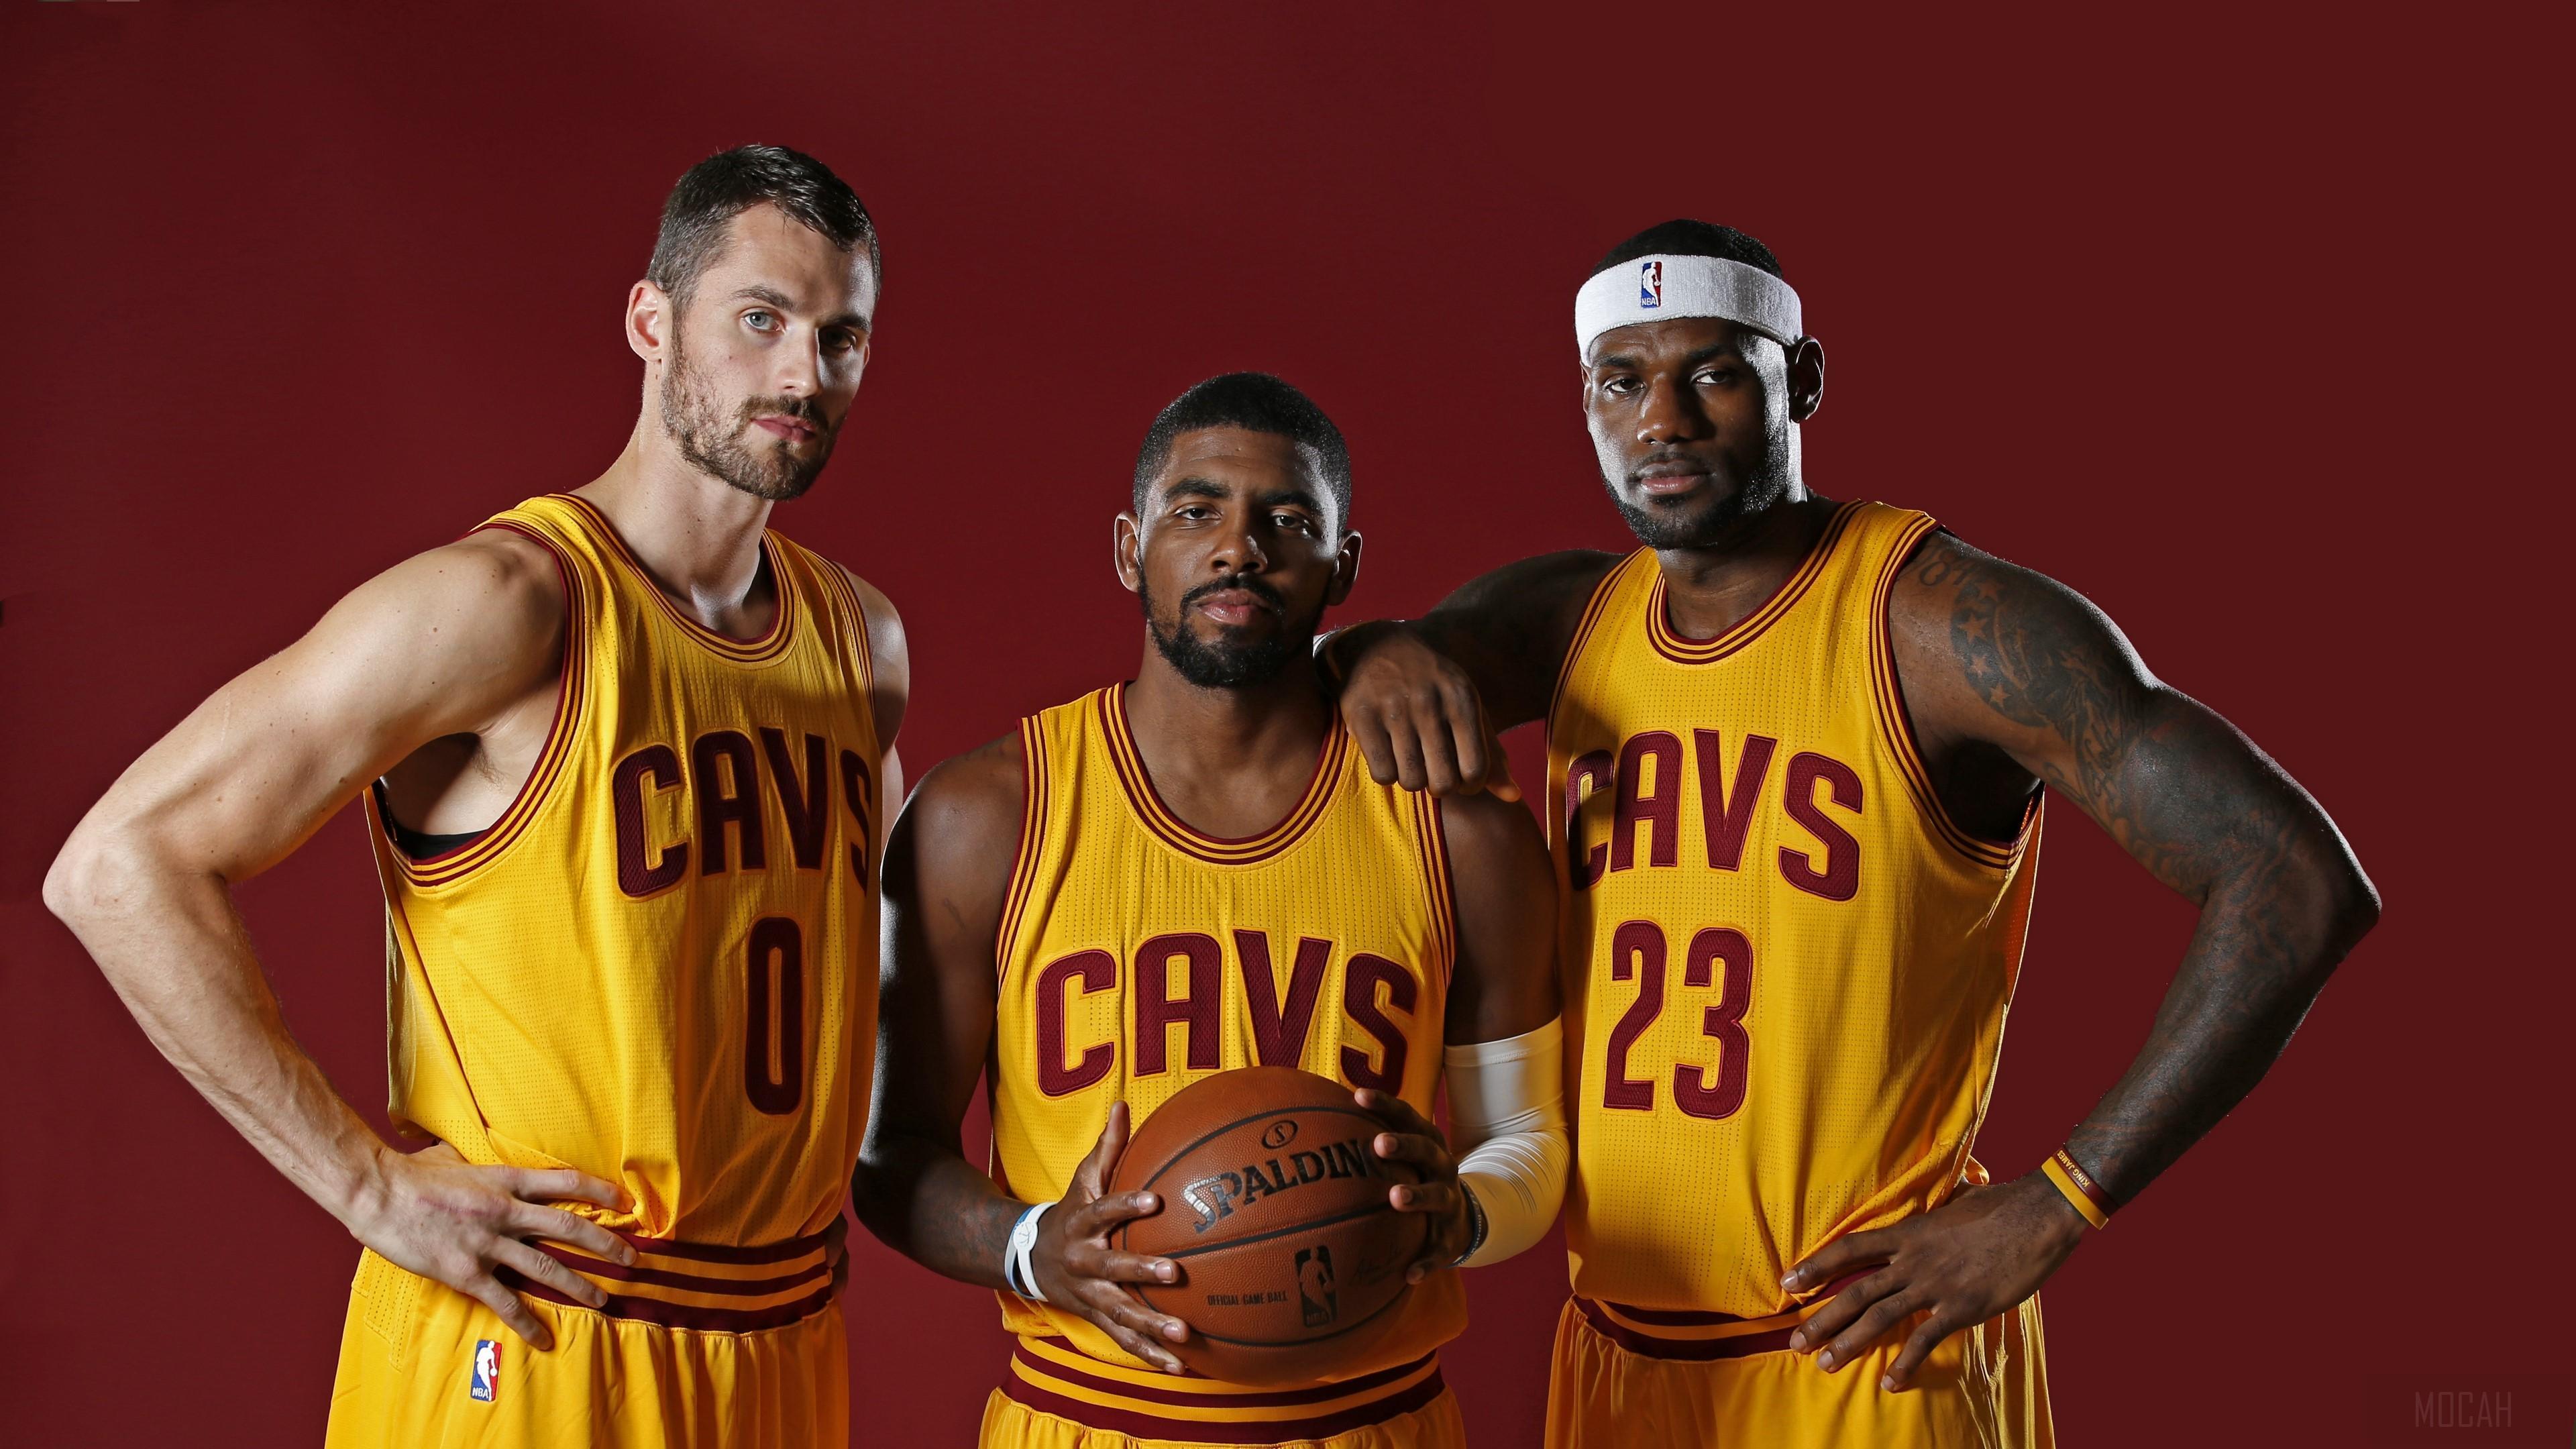 HD wallpaper, Kevin Love, Kyrie Irving, Anderson Varejao 4K, Cleveland Cavaliers